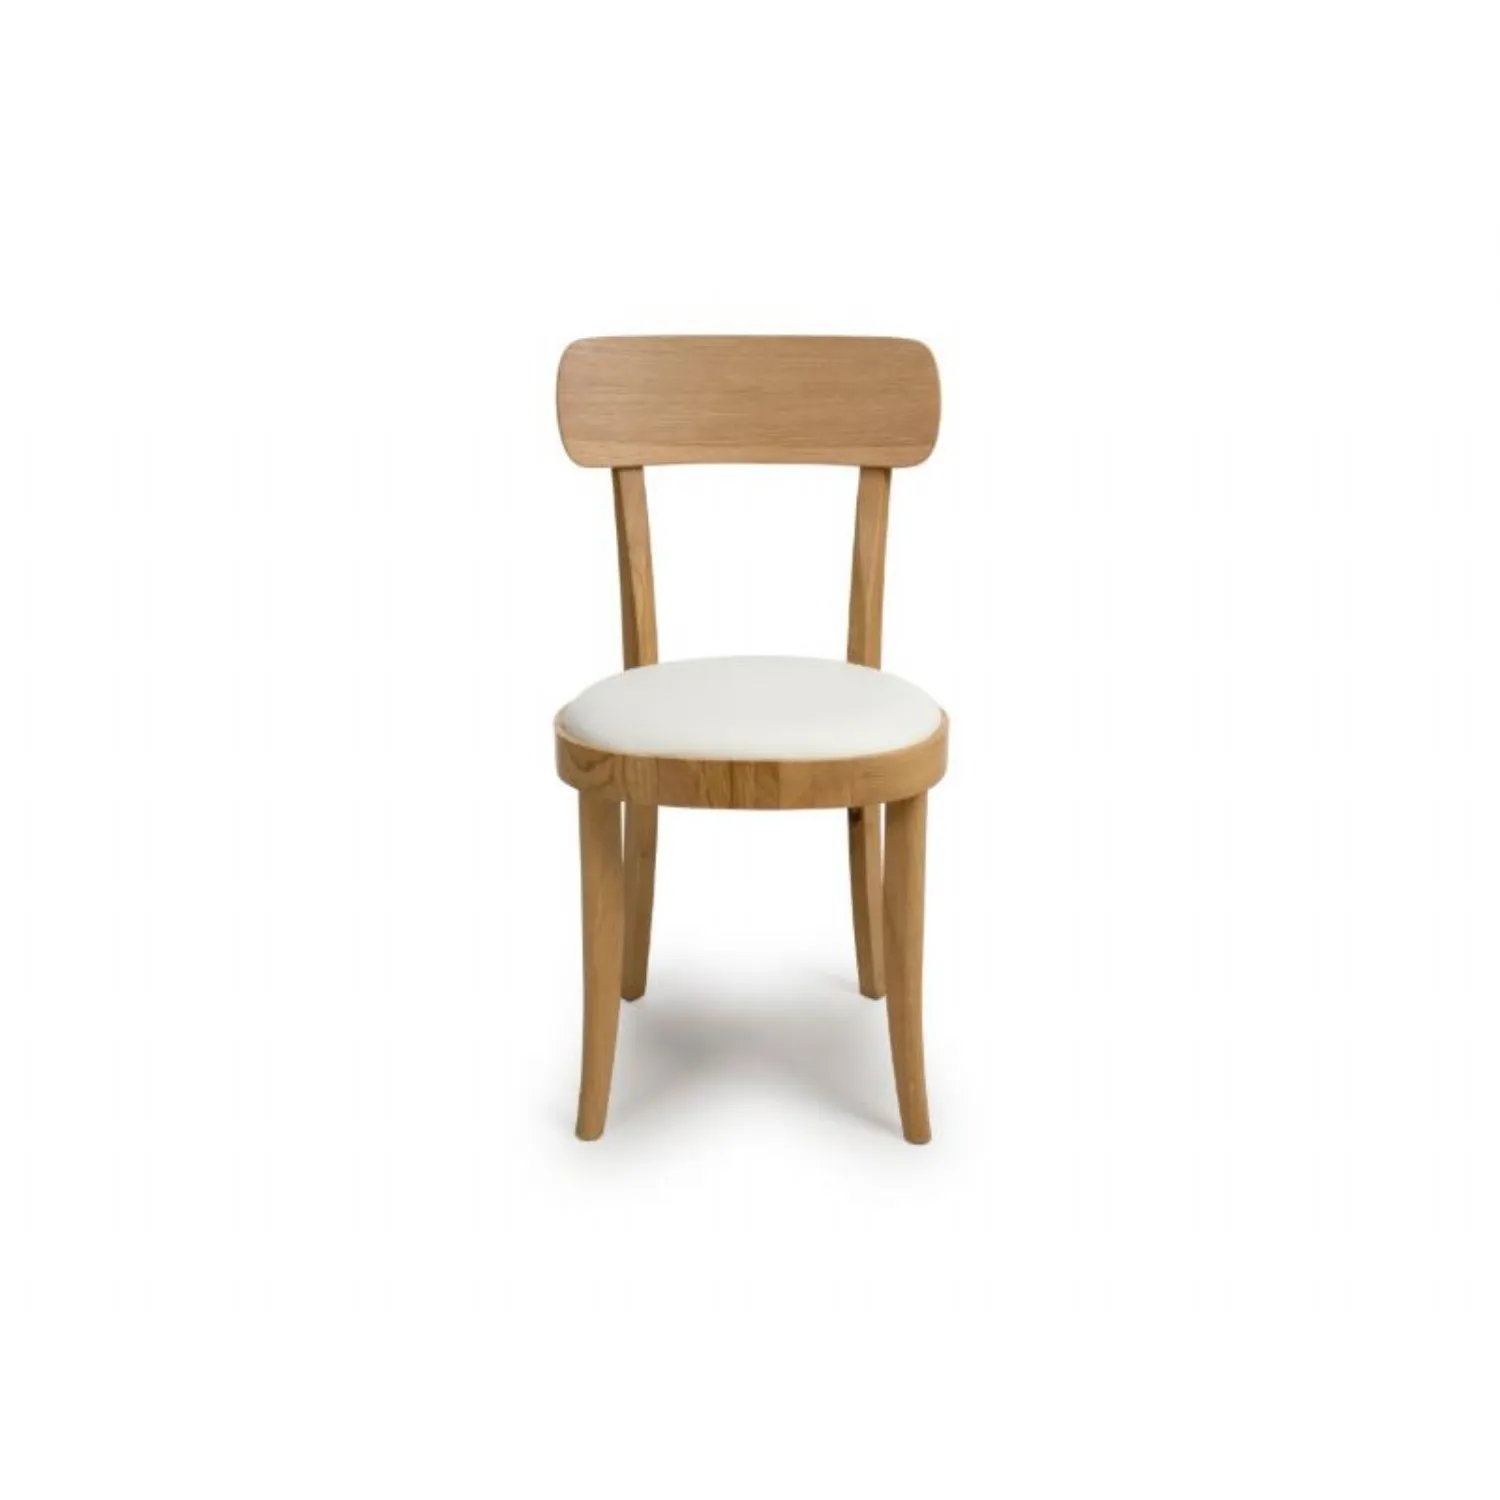 Oak Curved Back Dining Chair Round Fabric Seat